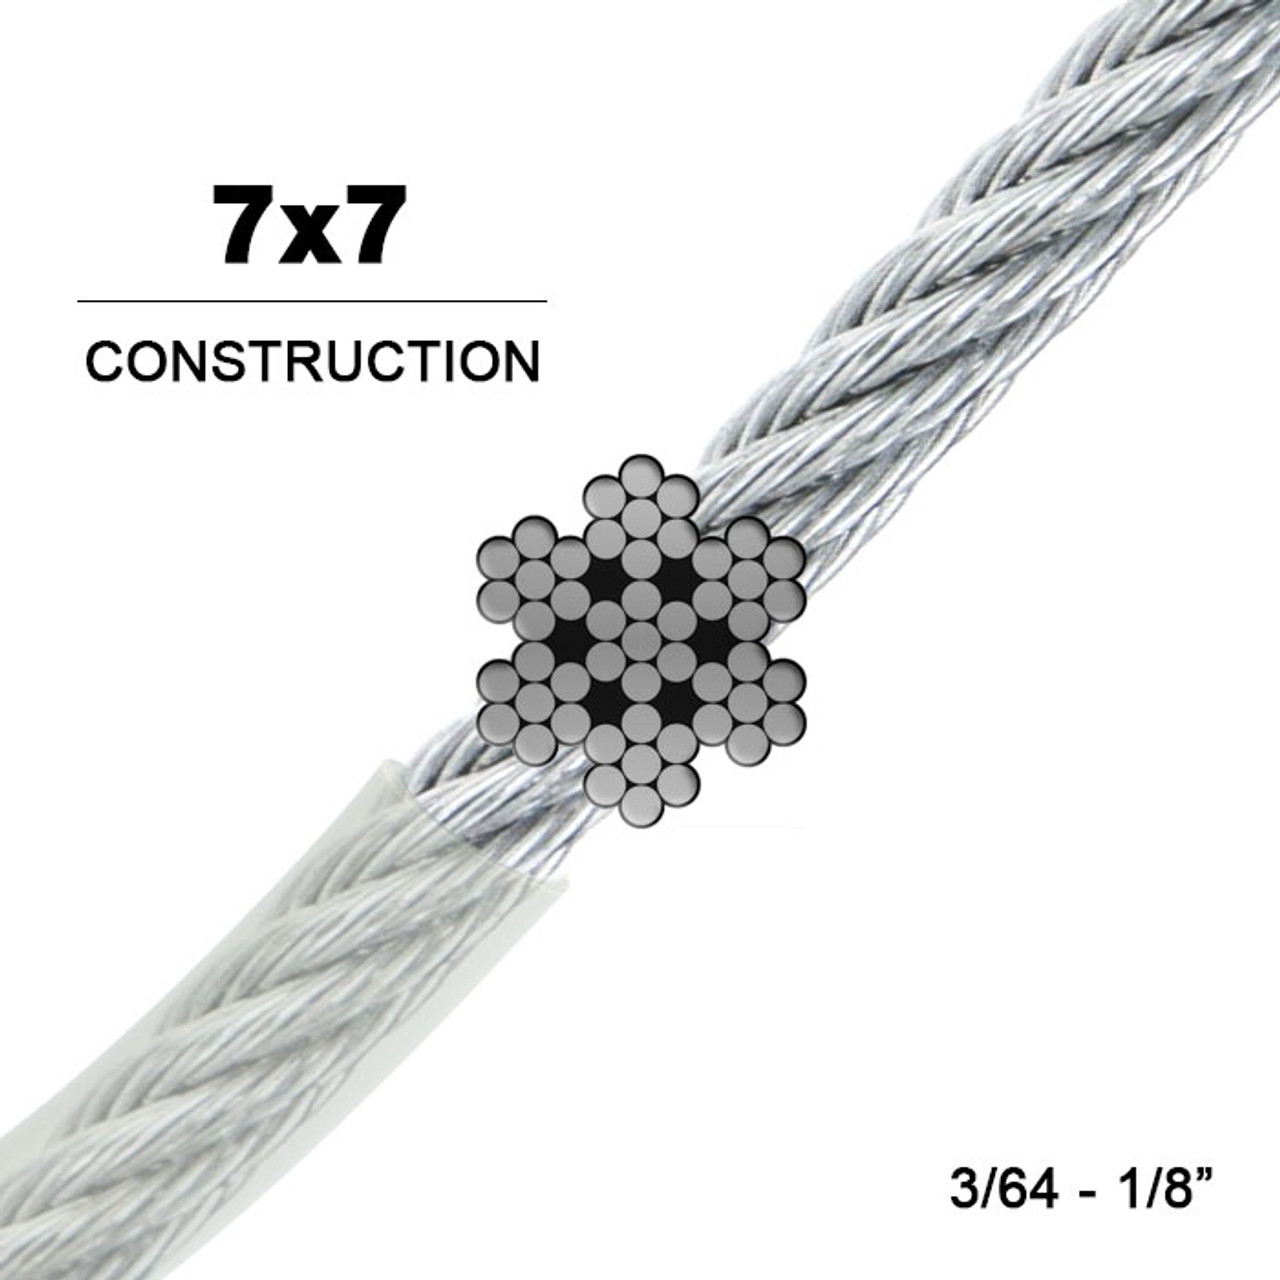 1/16" 100ft coil 1/16" diameter Cable Details about   304 Stainless Steel Wire Rope Cable 7x7 